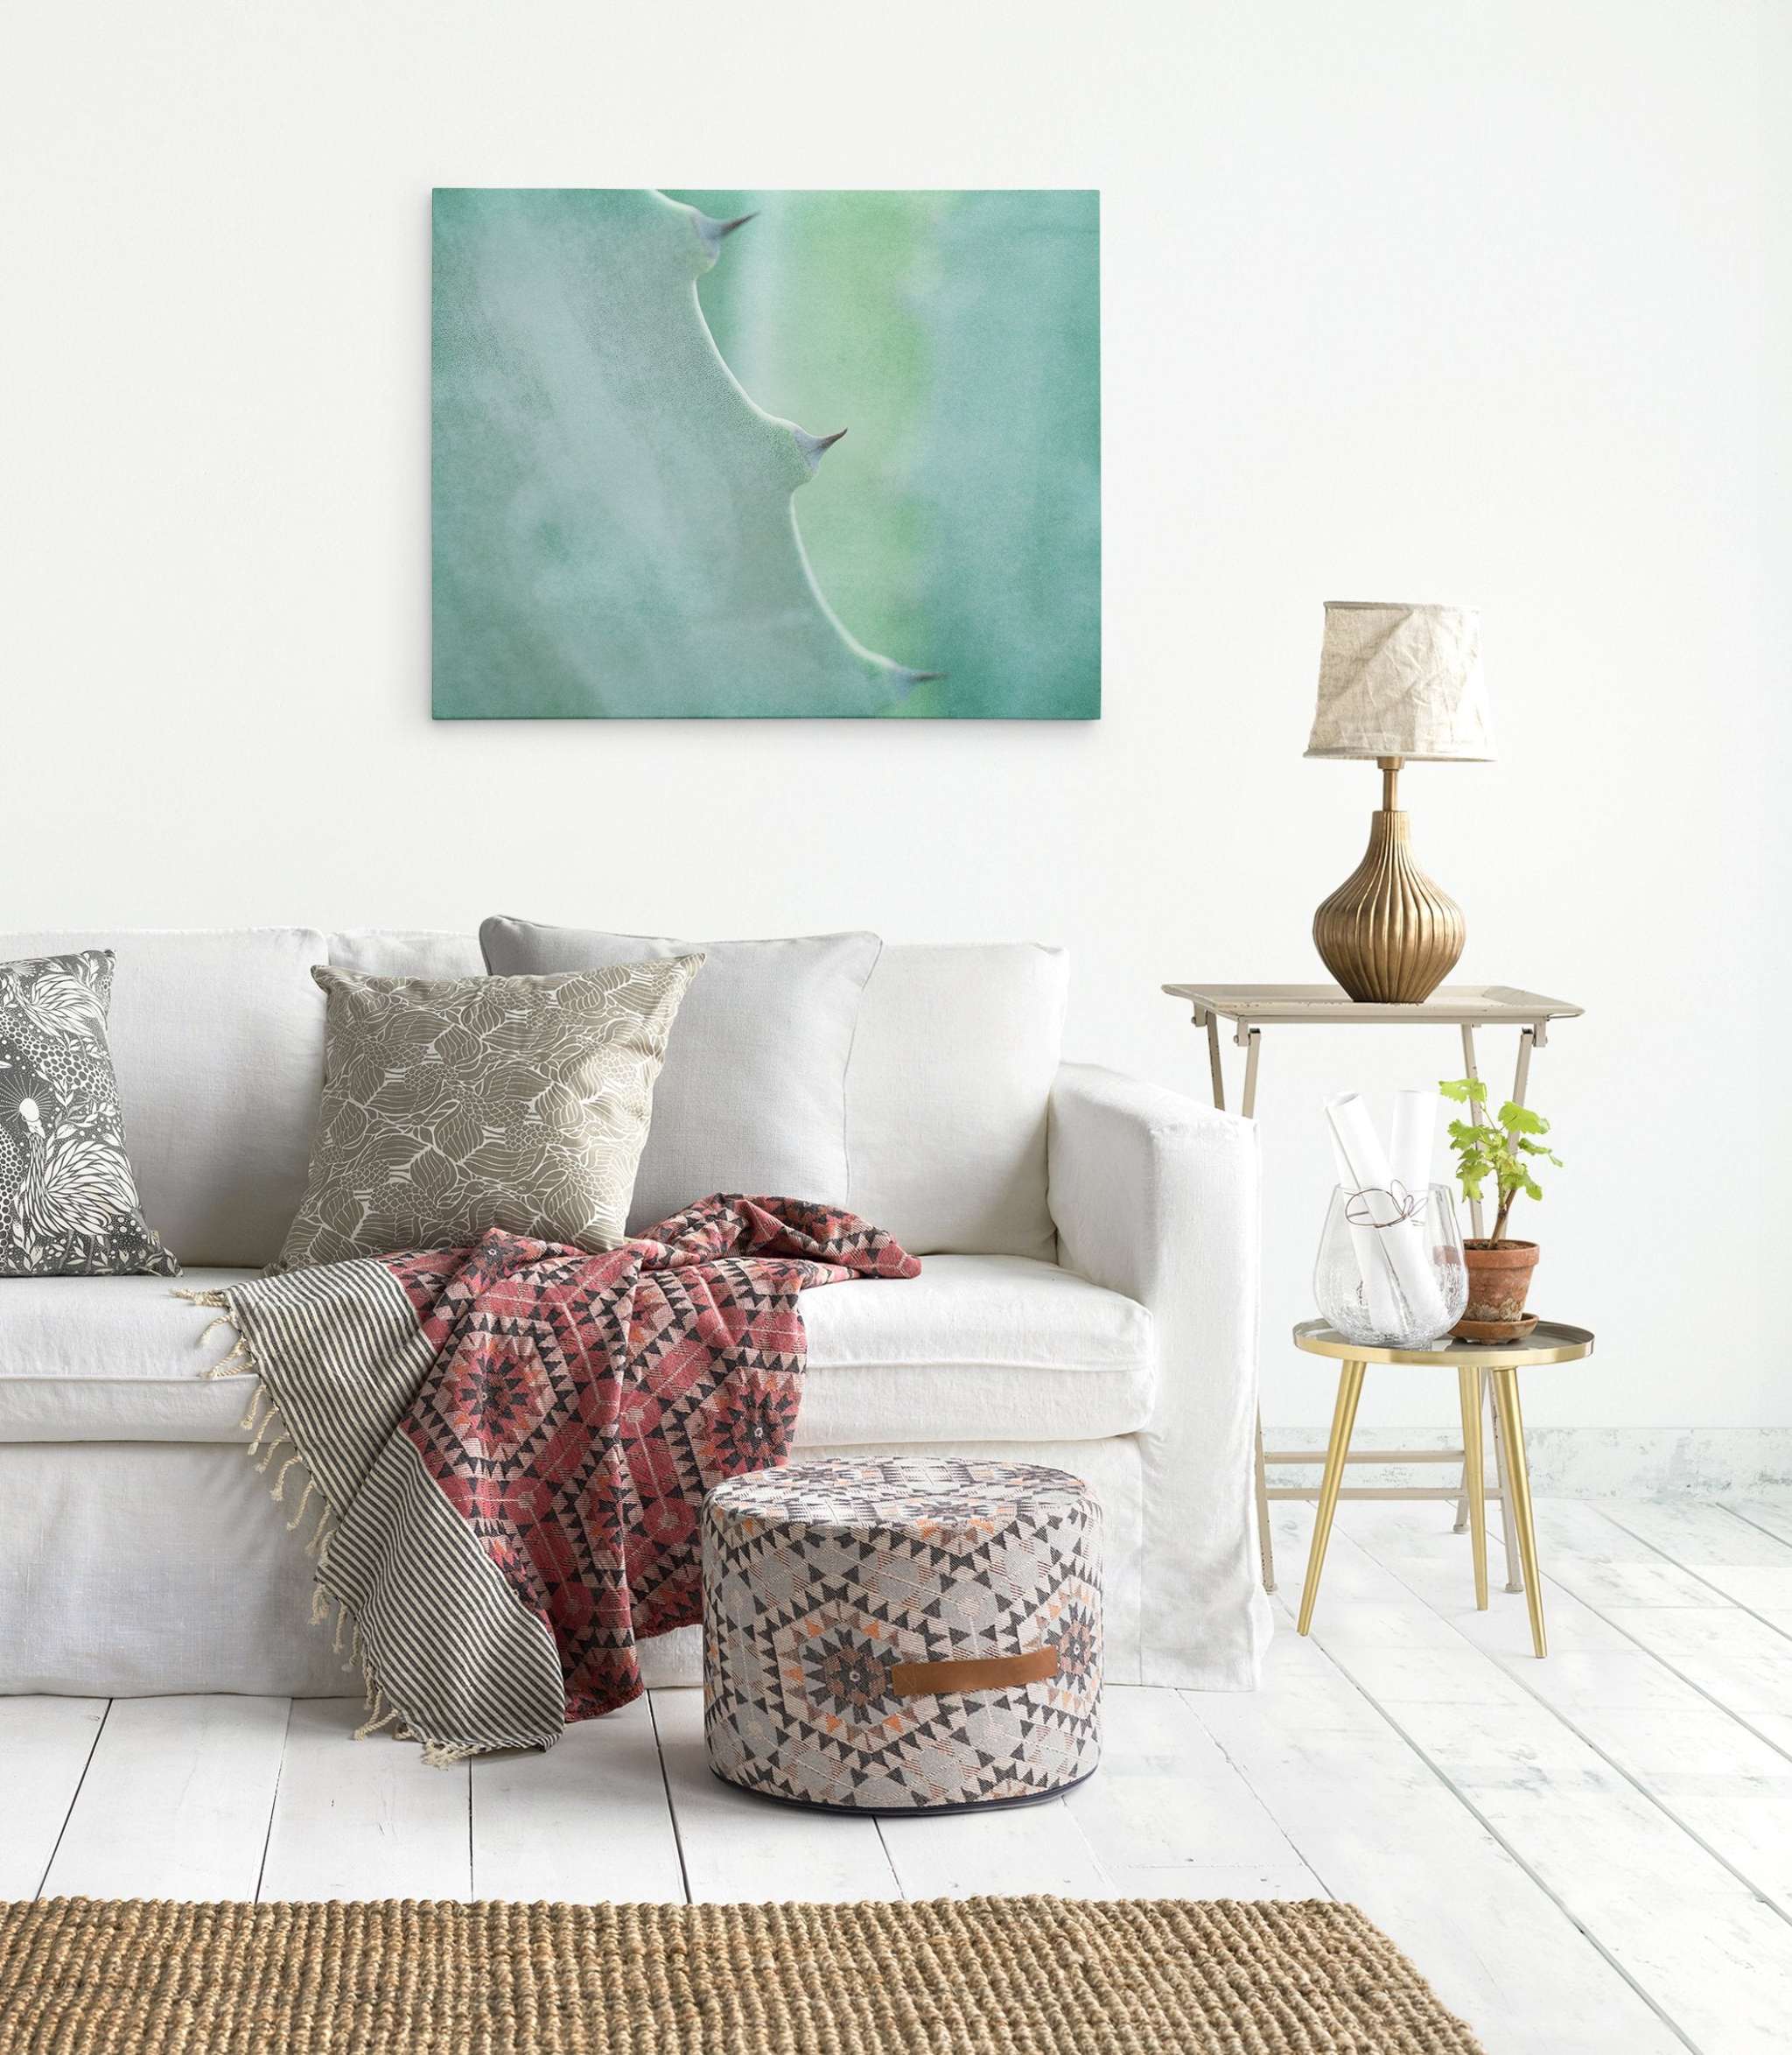 A bright and airy living room features a white sofa adorned with patterned cushions and a red geometric throw. A stylish pouf sits nearby. A side table holds a lamp, a glass pitcher, and an Aloe Vera plant. Offley Green's Mint Green Botanical Wall Art, 'Aloe Vera Spikes' on premium artist-grade canvas hangs on the wall. Light wooden flooring.